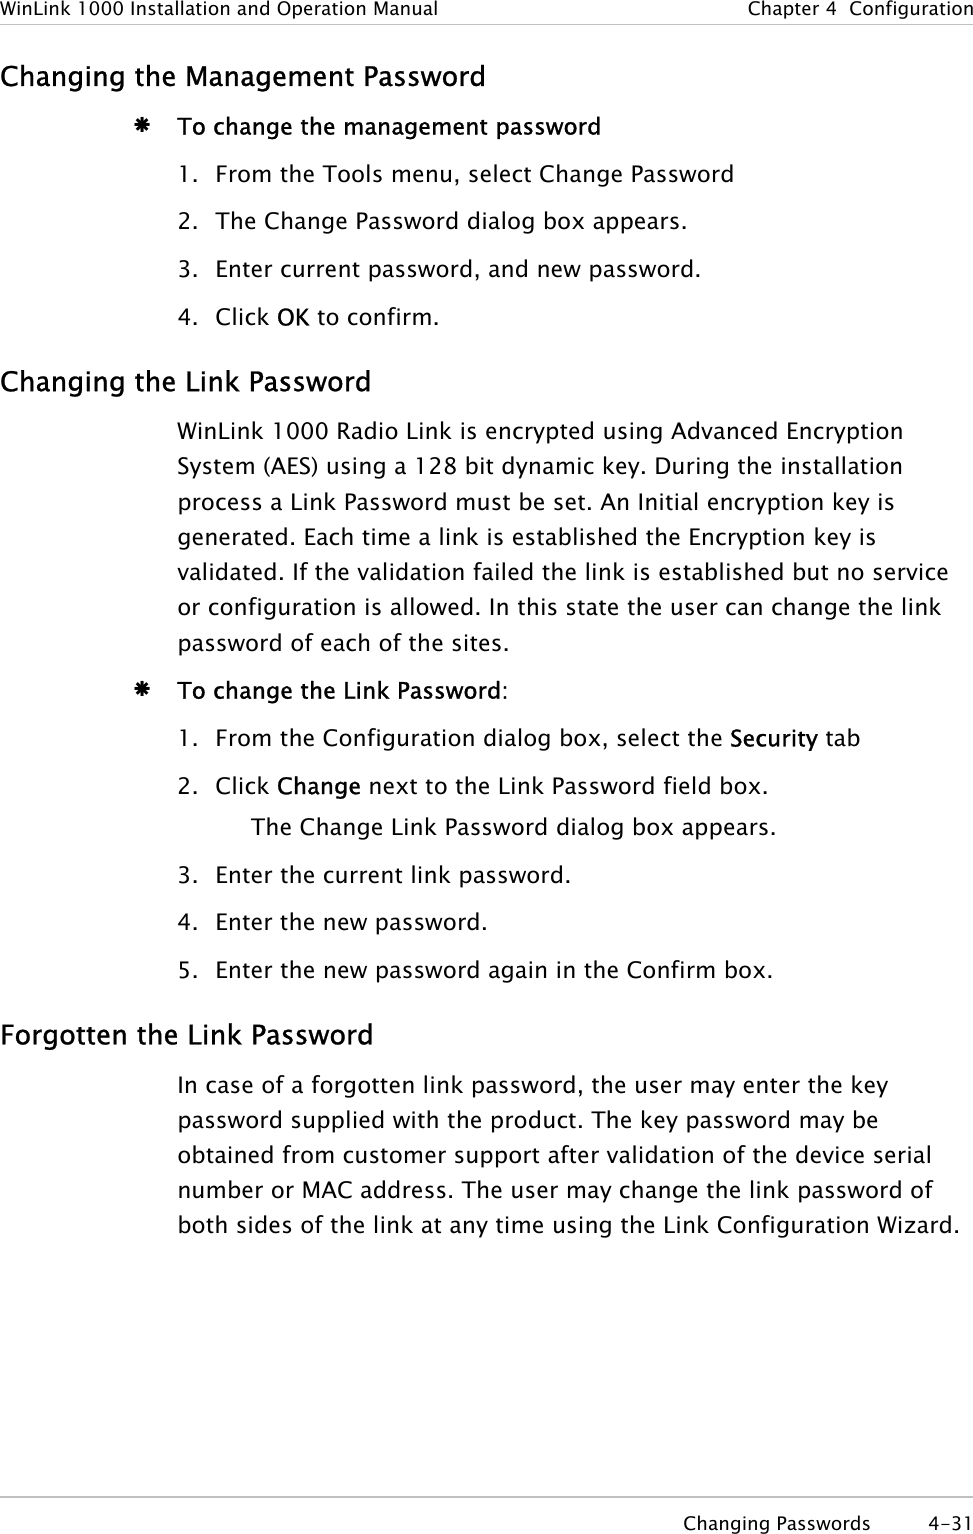 WinLink 1000 Installation and Operation Manual  Chapter  4  Configuration Changing the Management Password Æ To change the management password 1. From the Tools menu, select Change Password 2. The Change Password dialog box appears. 3. Enter current password, and new password. 4. Click OK to confirm. Changing the Link Password WinLink 1000 Radio Link is encrypted using Advanced Encryption System (AES) using a 128 bit dynamic key. During the installation process a Link Password must be set. An Initial encryption key is generated. Each time a link is established the Encryption key is validated. If the validation failed the link is established but no service or configuration is allowed. In this state the user can change the link password of each of the sites.  Æ To change the Link Password: 1. From the Configuration dialog box, select the Security tab 2. Click Change next to the Link Password field box. The Change Link Password dialog box appears. 3. Enter the current link password. 4. Enter the new password. 5. Enter the new password again in the Confirm box. Forgotten the Link Password In case of a forgotten link password, the user may enter the key password supplied with the product. The key password may be obtained from customer support after validation of the device serial number or MAC address. The user may change the link password of both sides of the link at any time using the Link Configuration Wizard.   Changing Passwords  4-31 